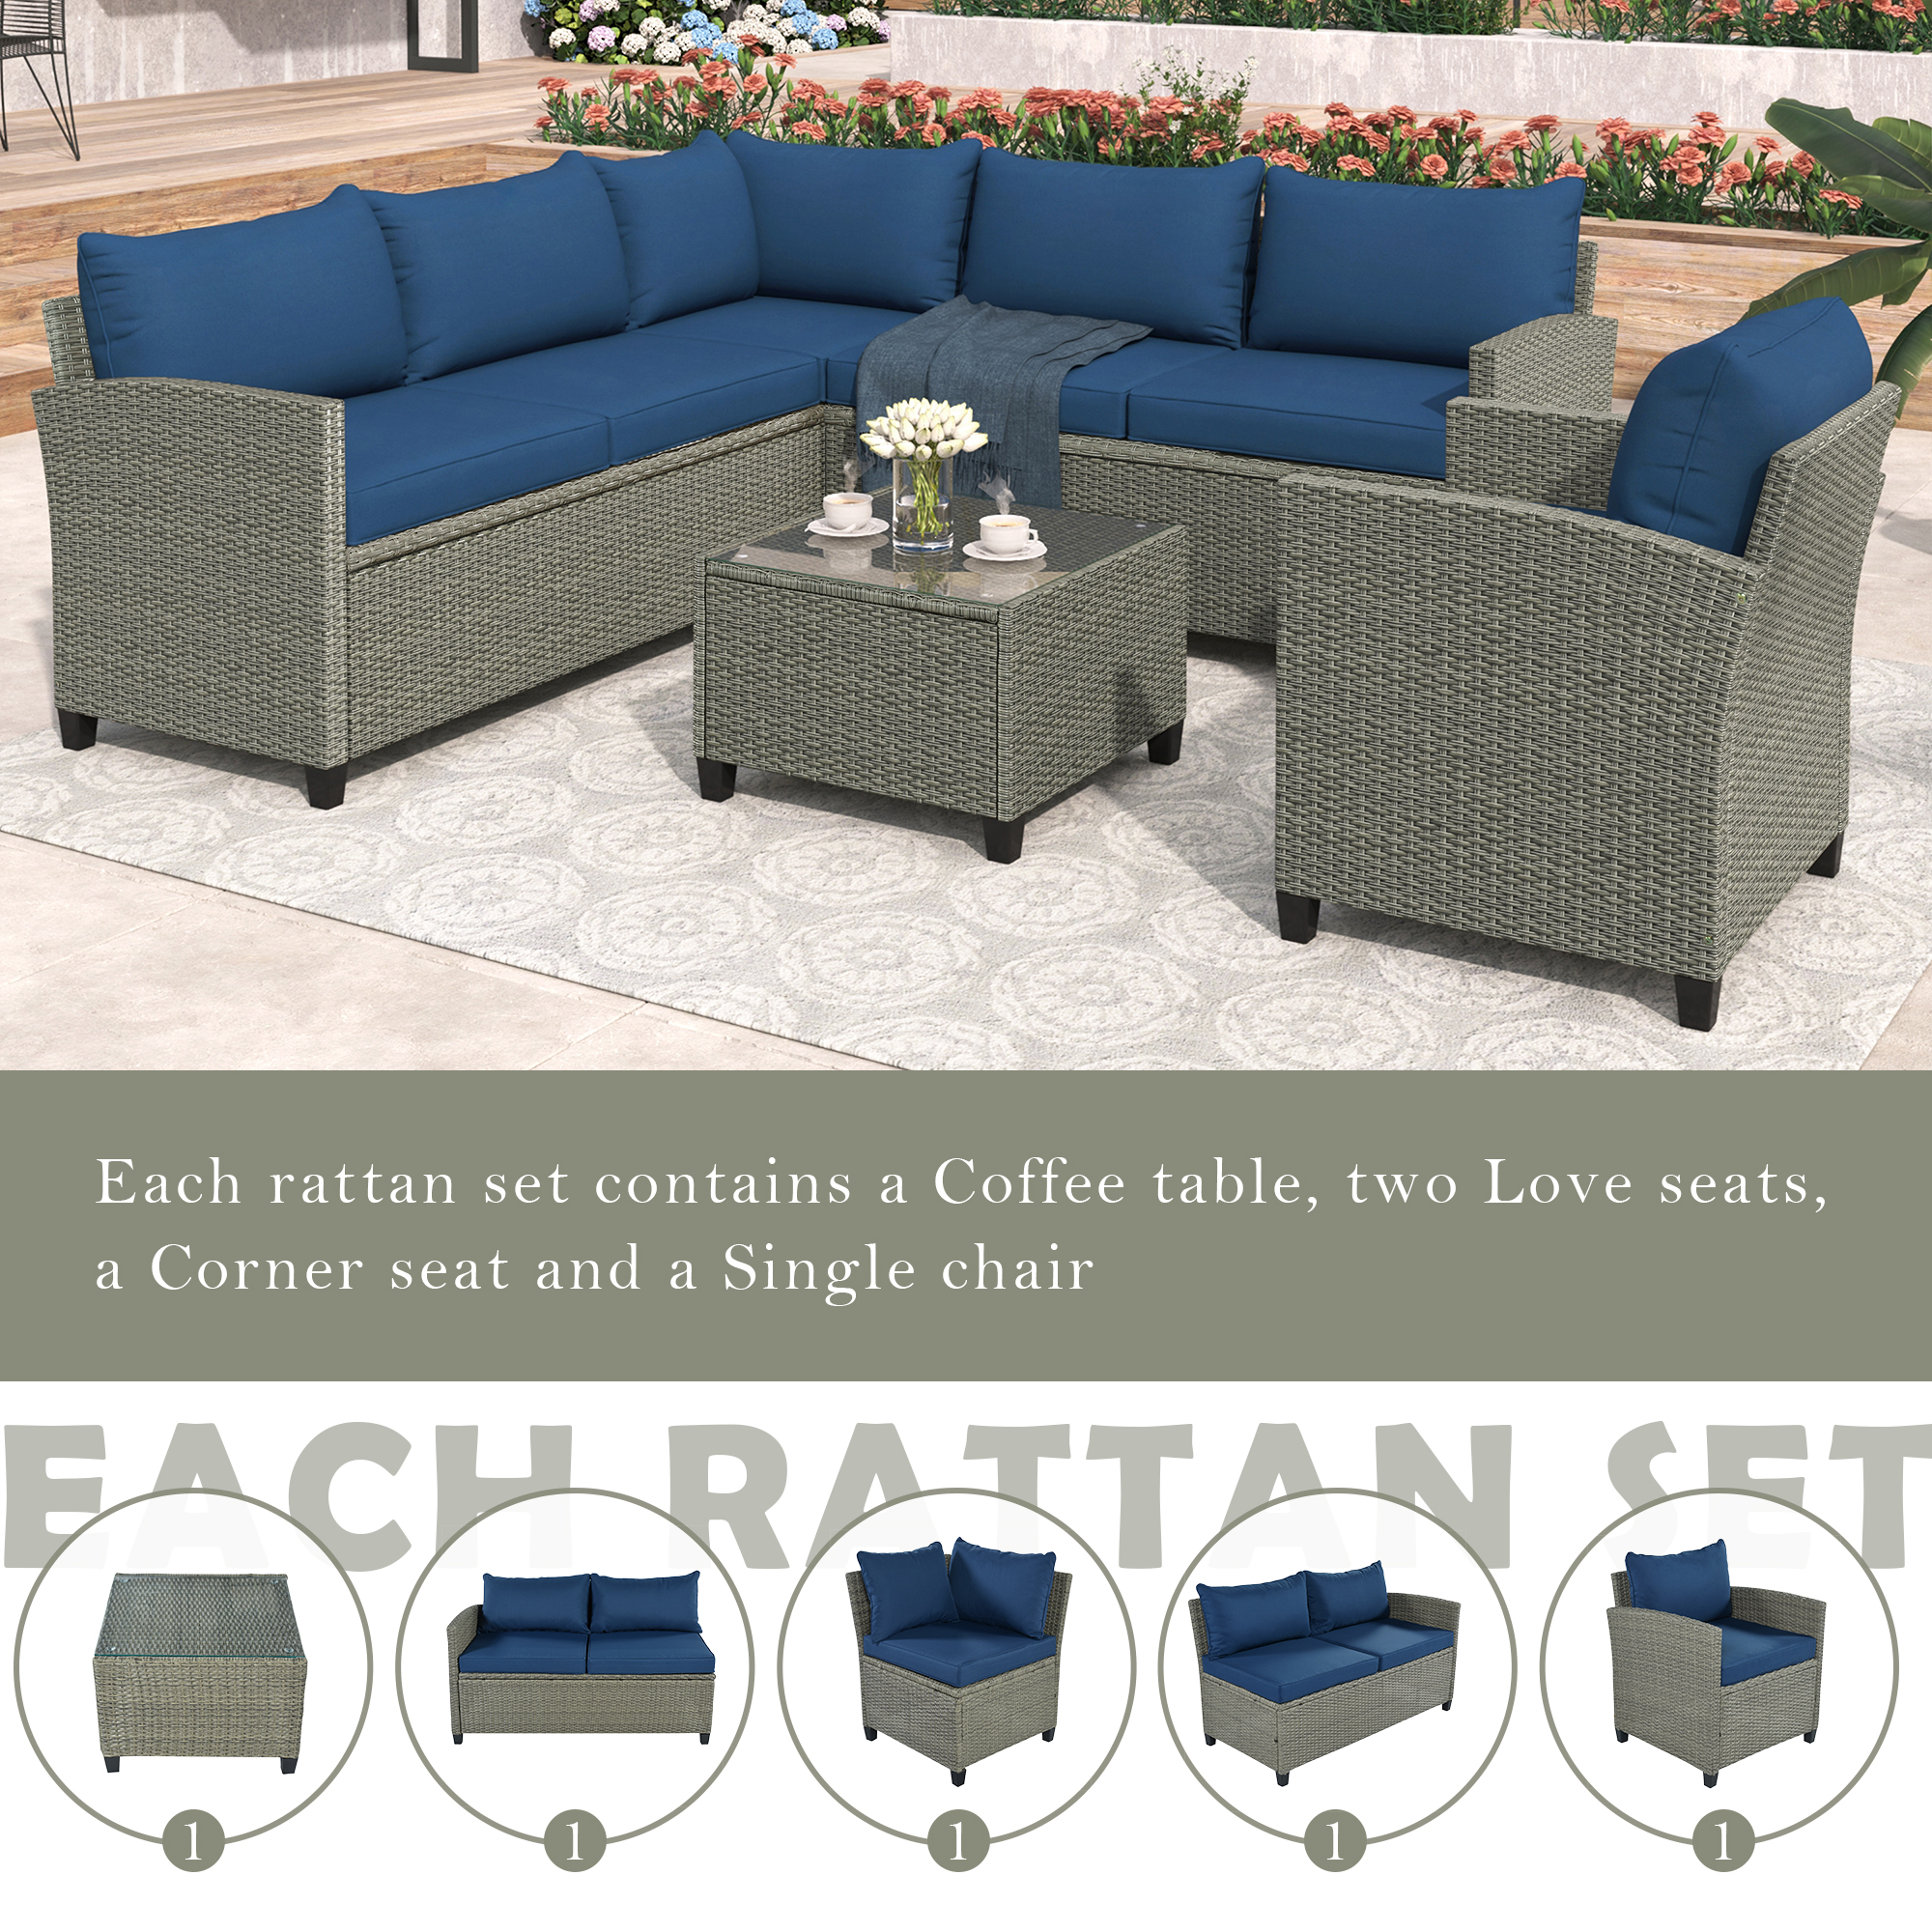 BTMWAY 5 Pieces Outdoor Wicker Sectional Sofa Set, 3.1" Cushioned Outdoor Furniture Set, Rattan Patio Conversation Set with Side Table, Up to 350lbs Capacity, for Backyard Garden Patio,Blue, N3011 - image 4 of 11